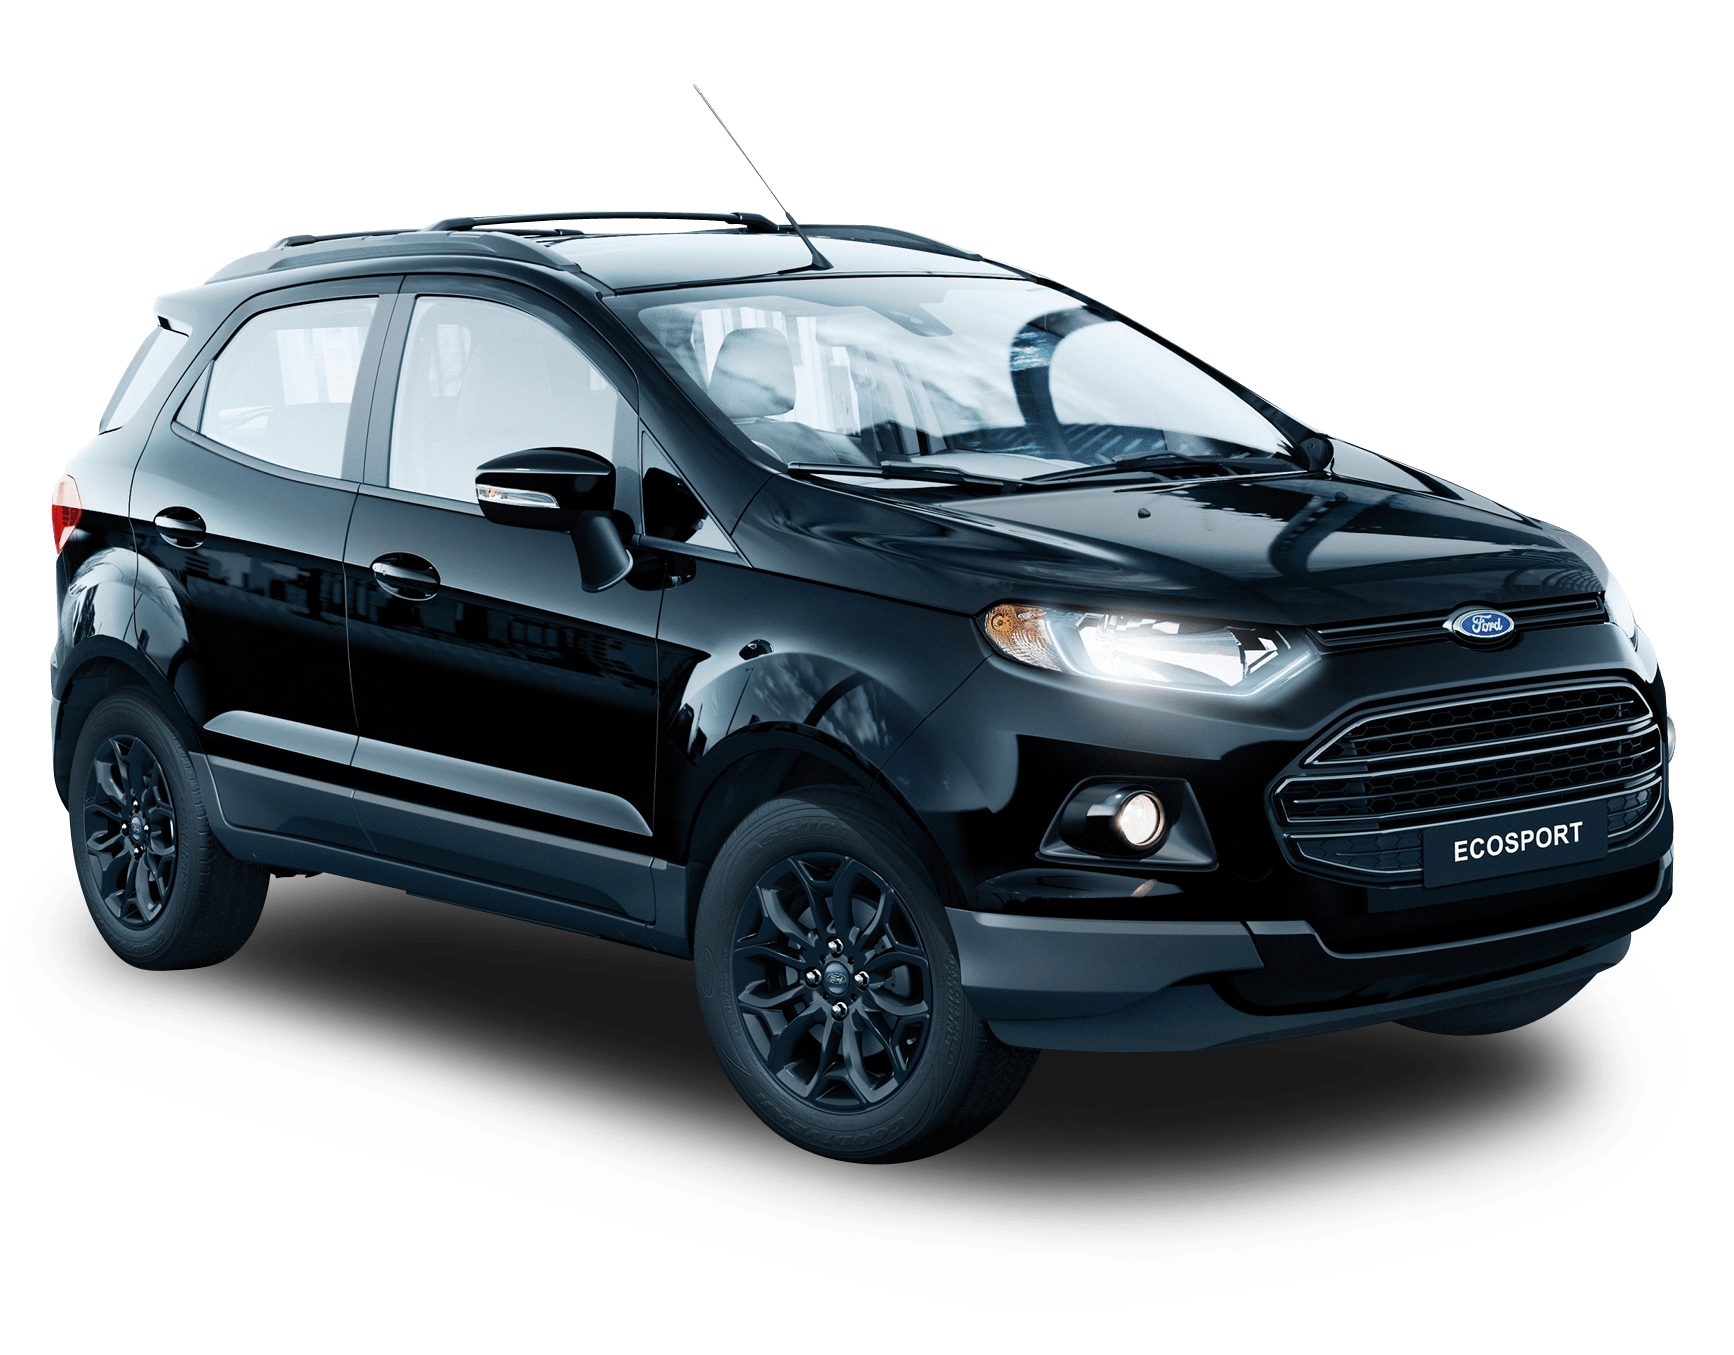 Ford Ecosport Review, For Sale, Colours, Models & Specs in